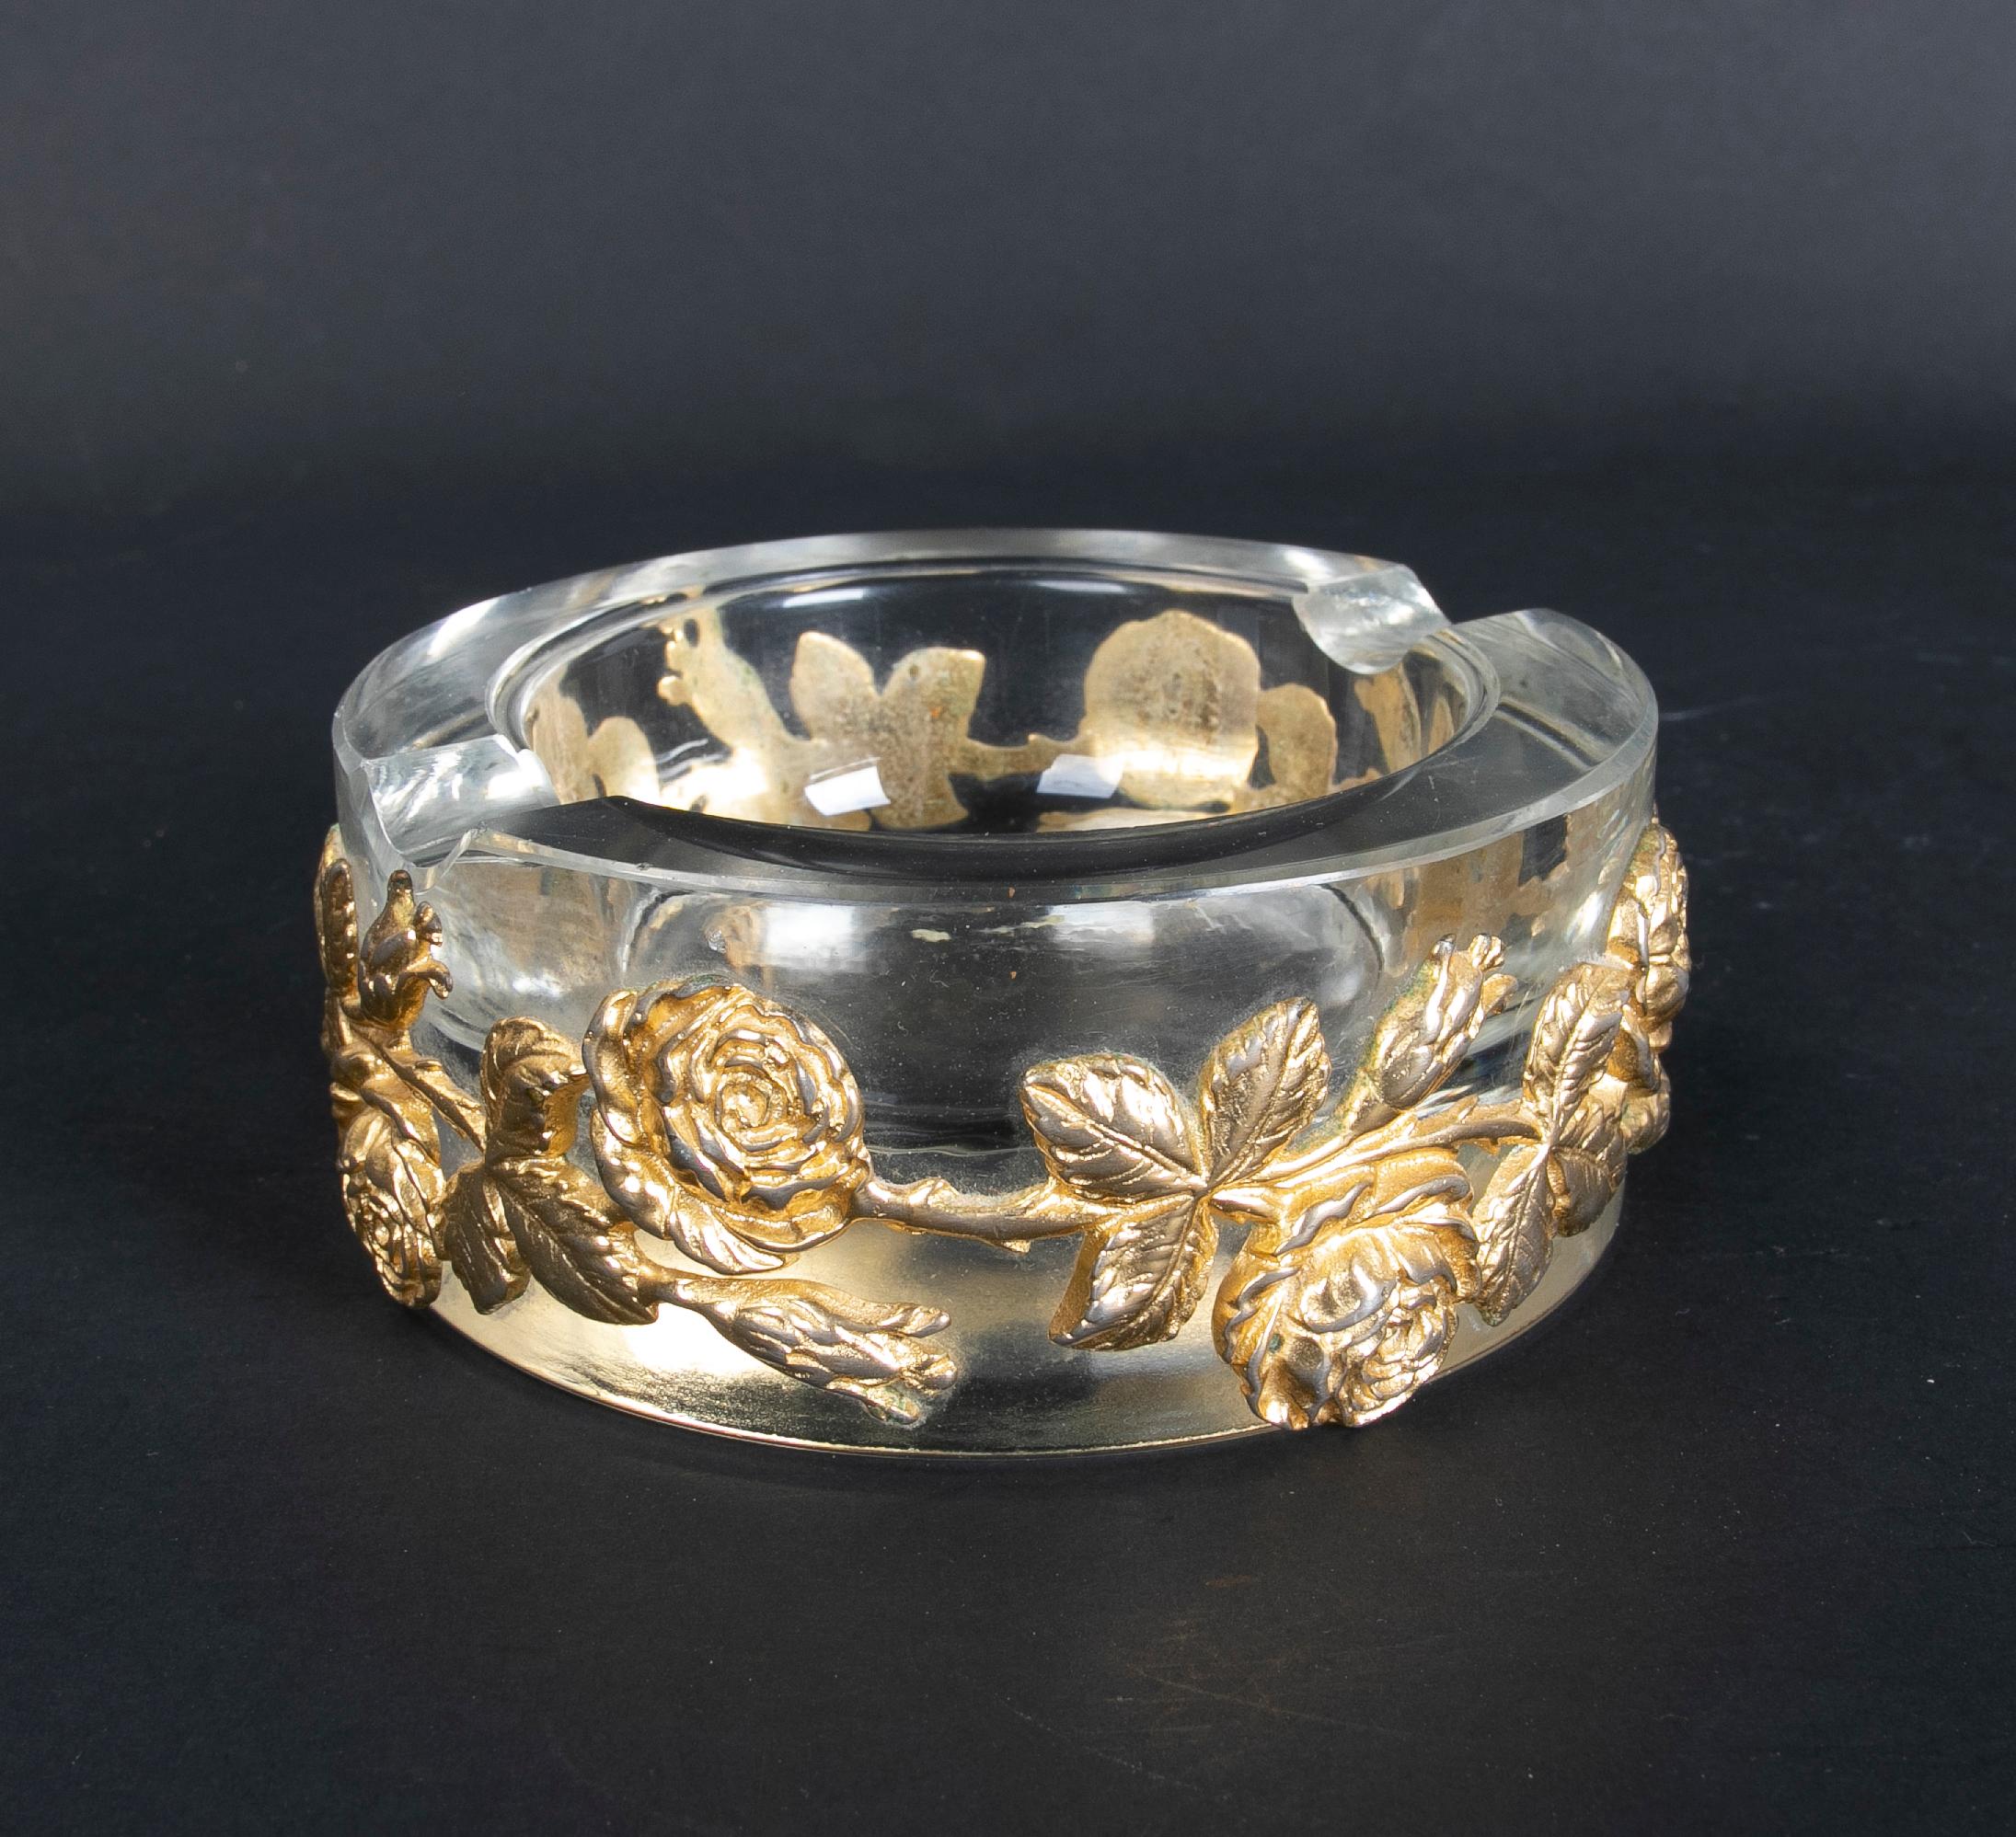 1980s solid glass ashtray with bronze flowers decoration.